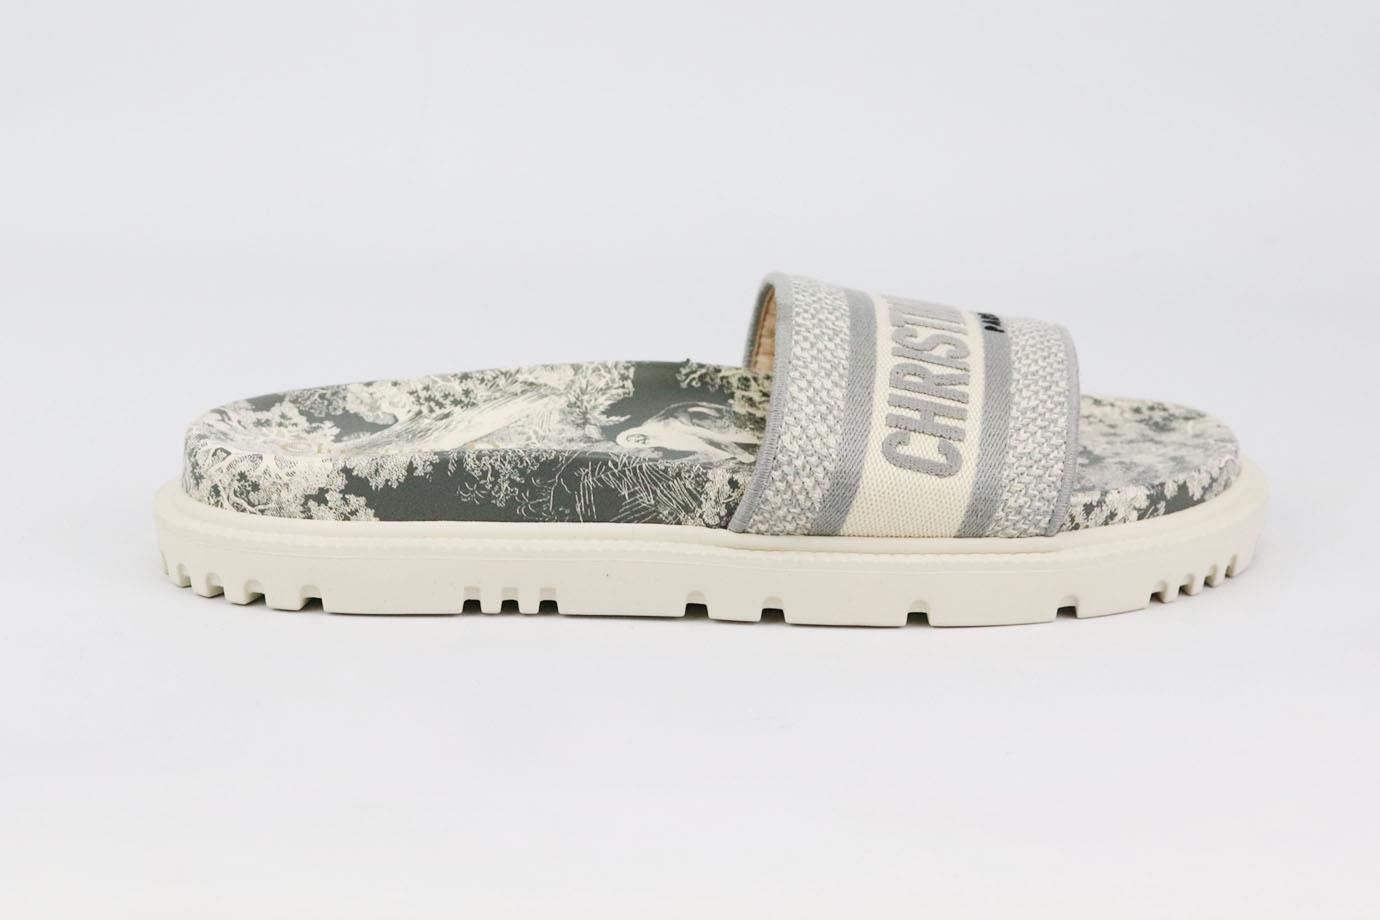 These ‘DWay’ slides by Christian Dior are everything you'd want in a summer pair - they're comfortable, stylish and endlessly versatile, made in Spain with grey and white Toile de Jouy print and matching logo embroidered cotton band across the